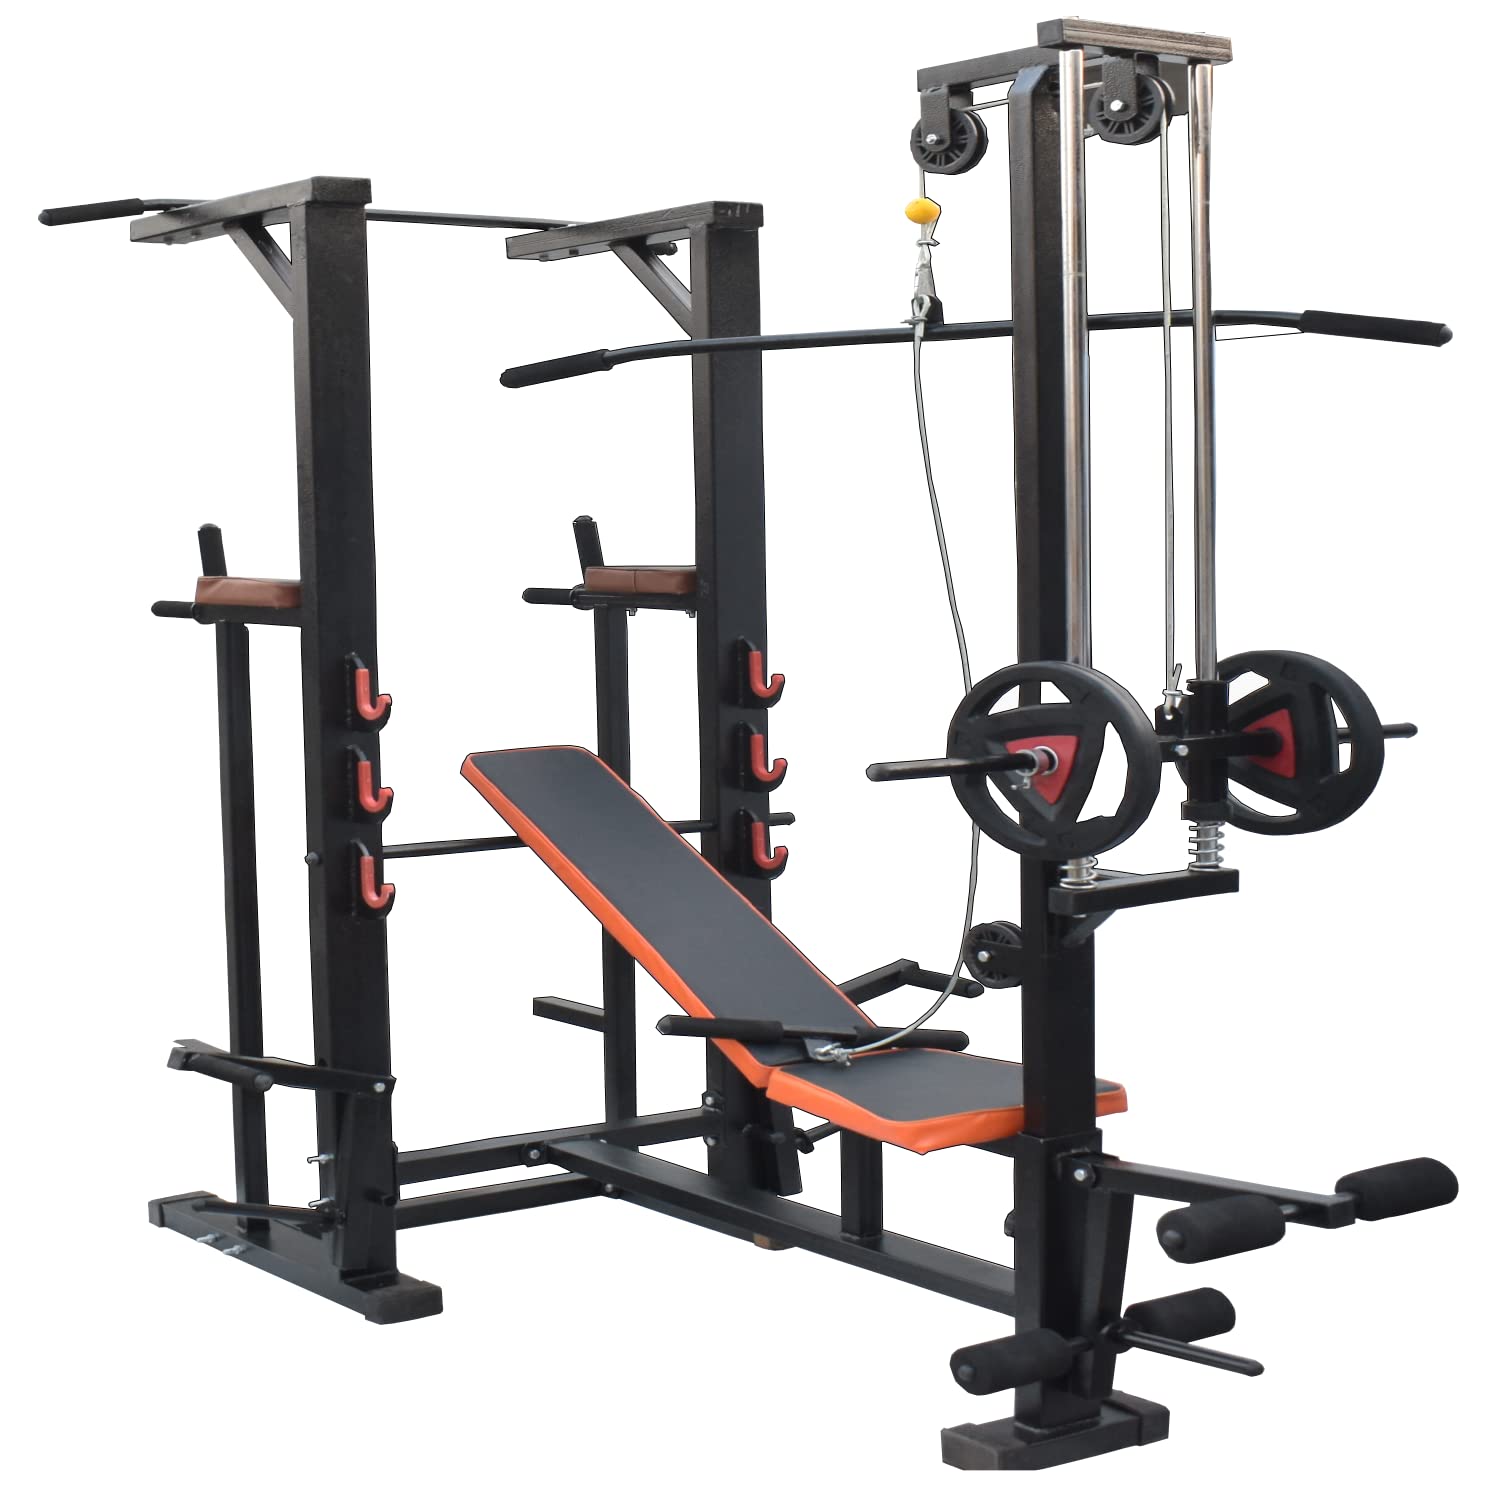 ABS Tower with 20 in 1 Gym Bench & Push up dips Workout Home Gym bench - Hashtag  Fitness : Online gym equipments for home